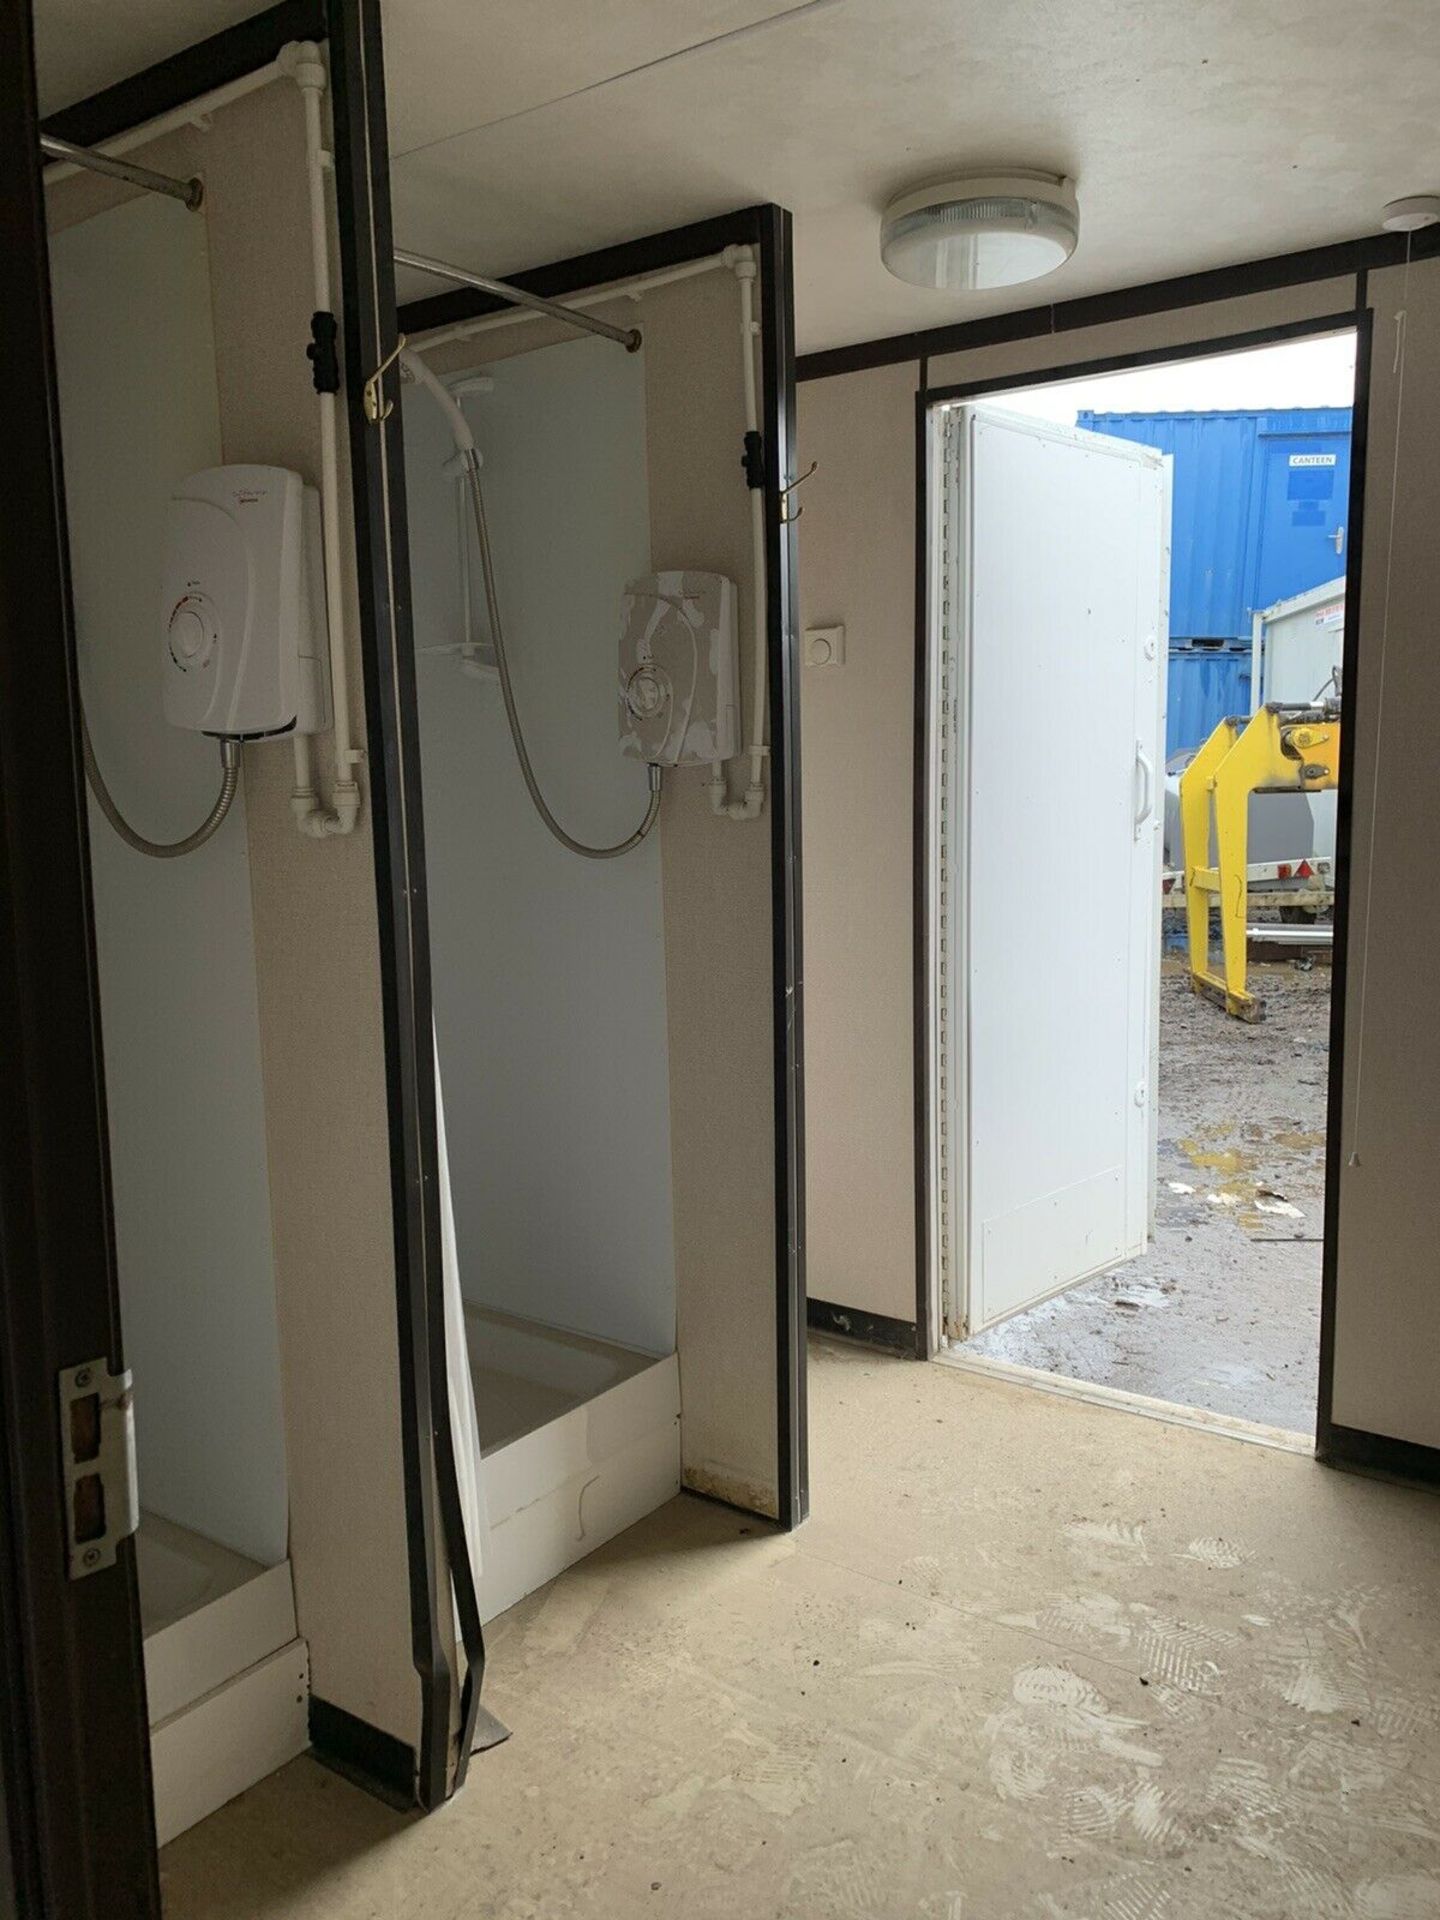 Portable Shower / Drying Room - Image 8 of 9